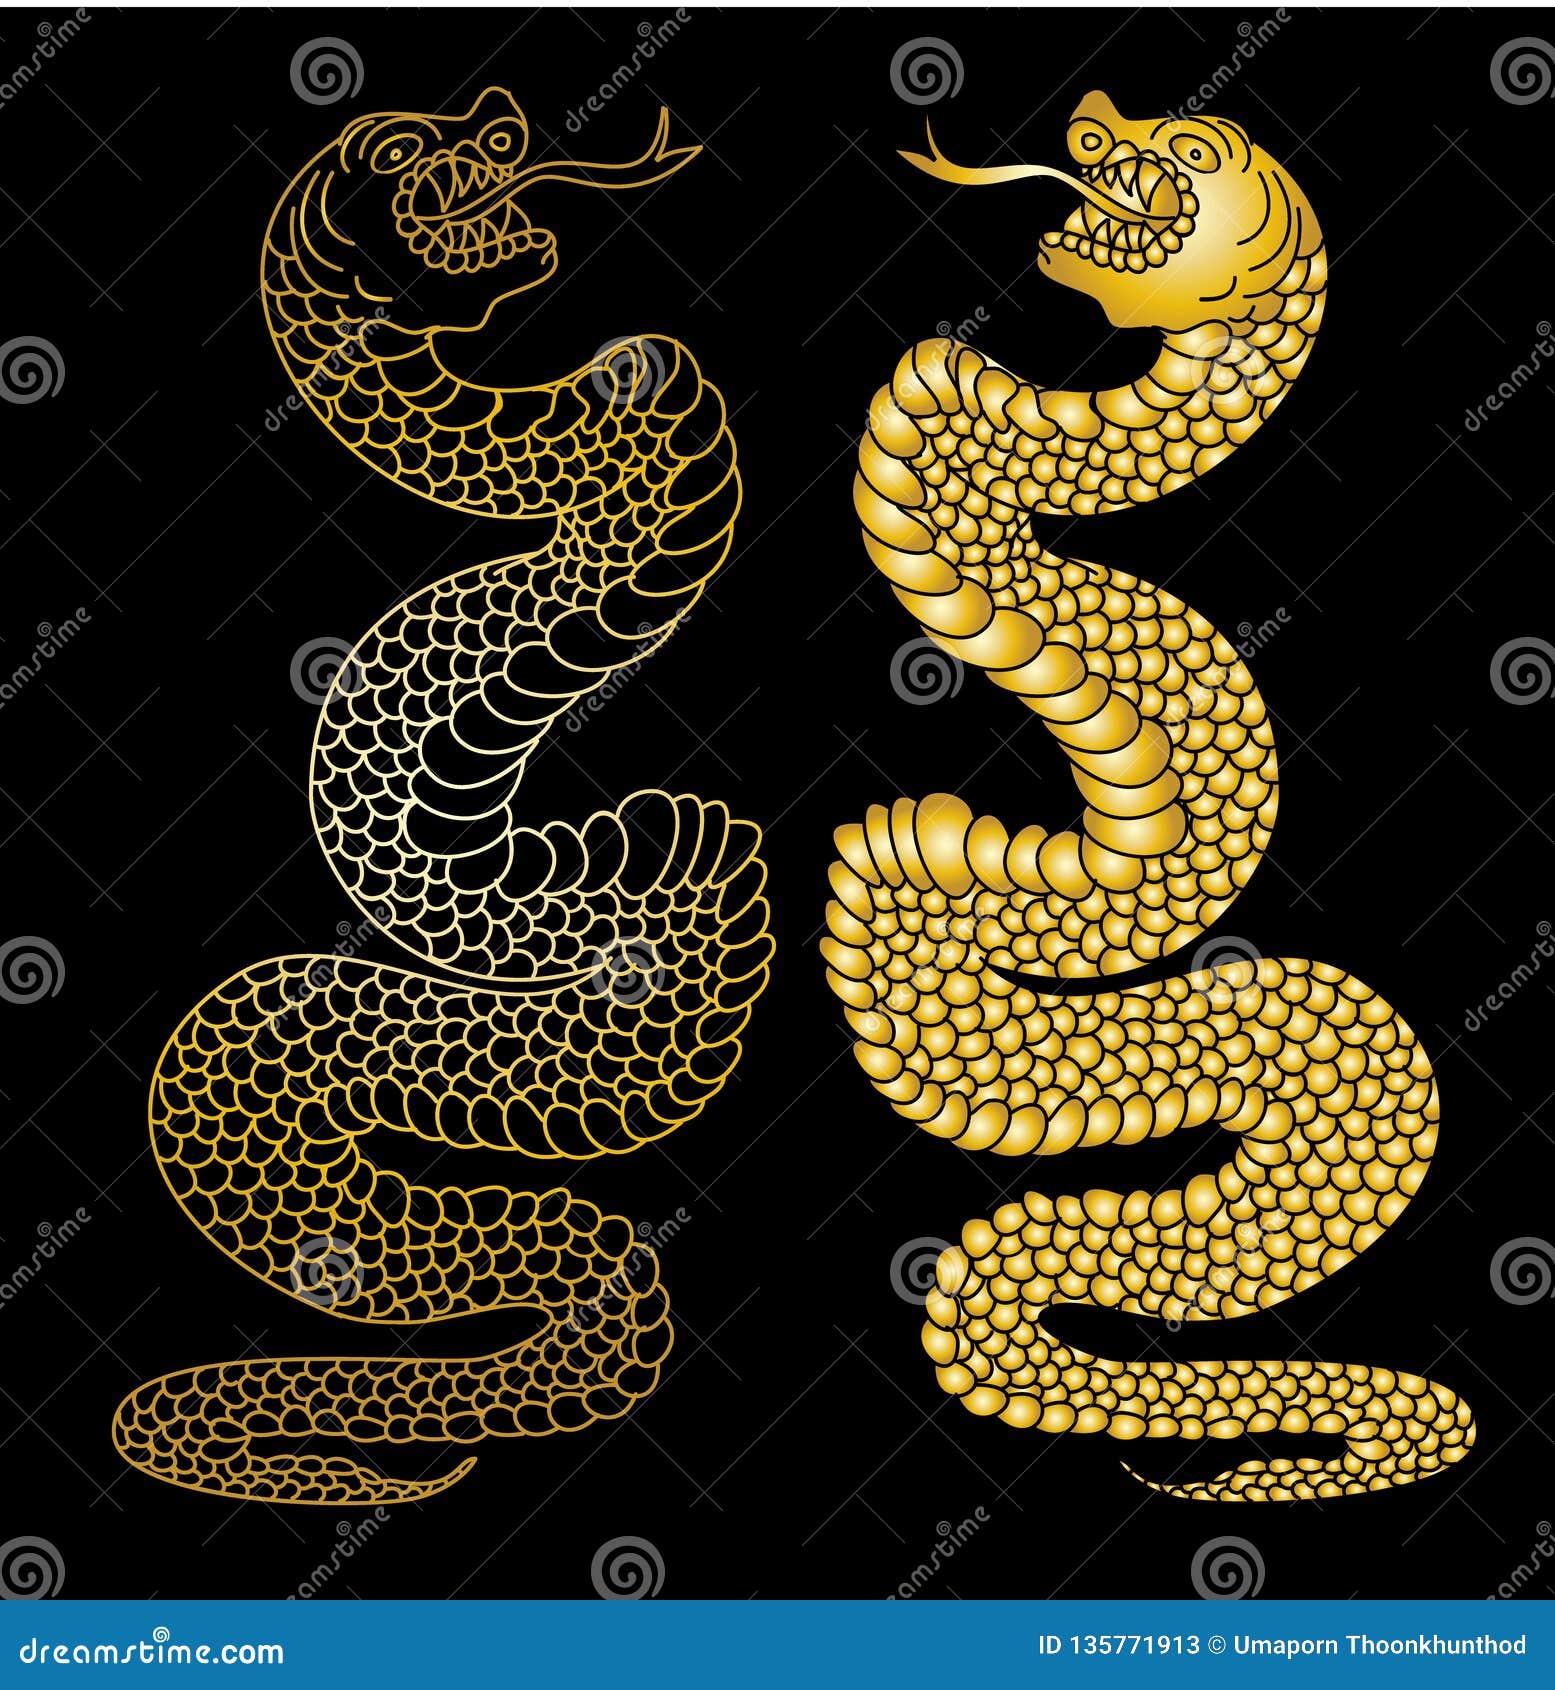 Japanese Snake Vector Tattoo for Printing.Black and White Sticker Fire Isolate on White Background. Stock Vector - Illustration of fire, koifish: 135771913